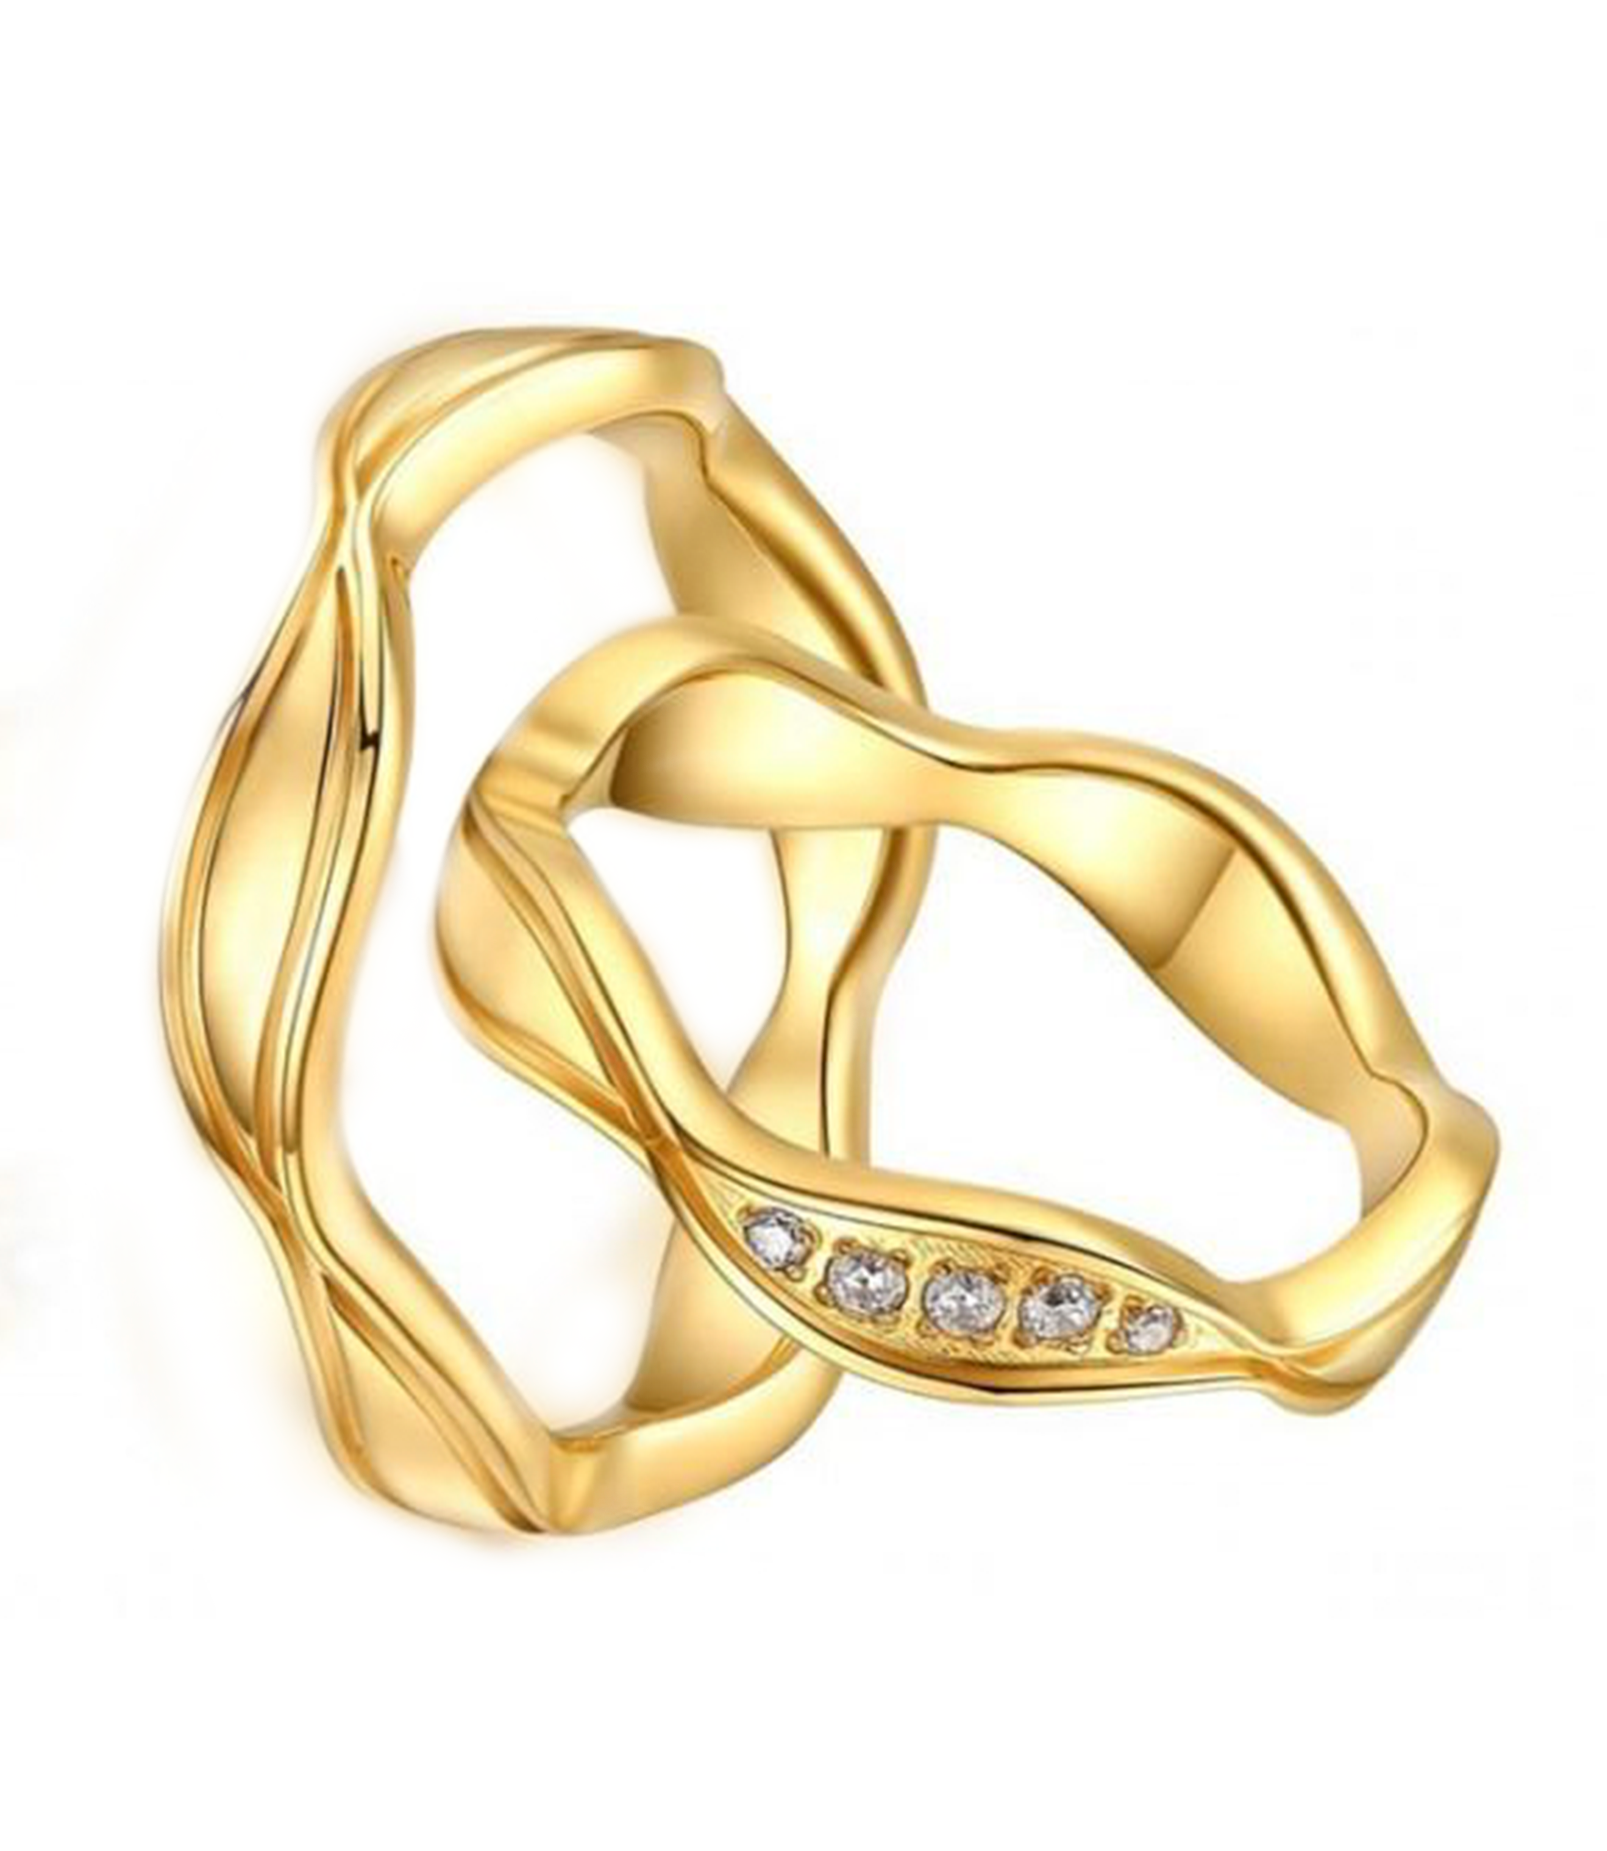 Alexis Gold Plated Titanium Wedding Ring with Swarovski Crystals